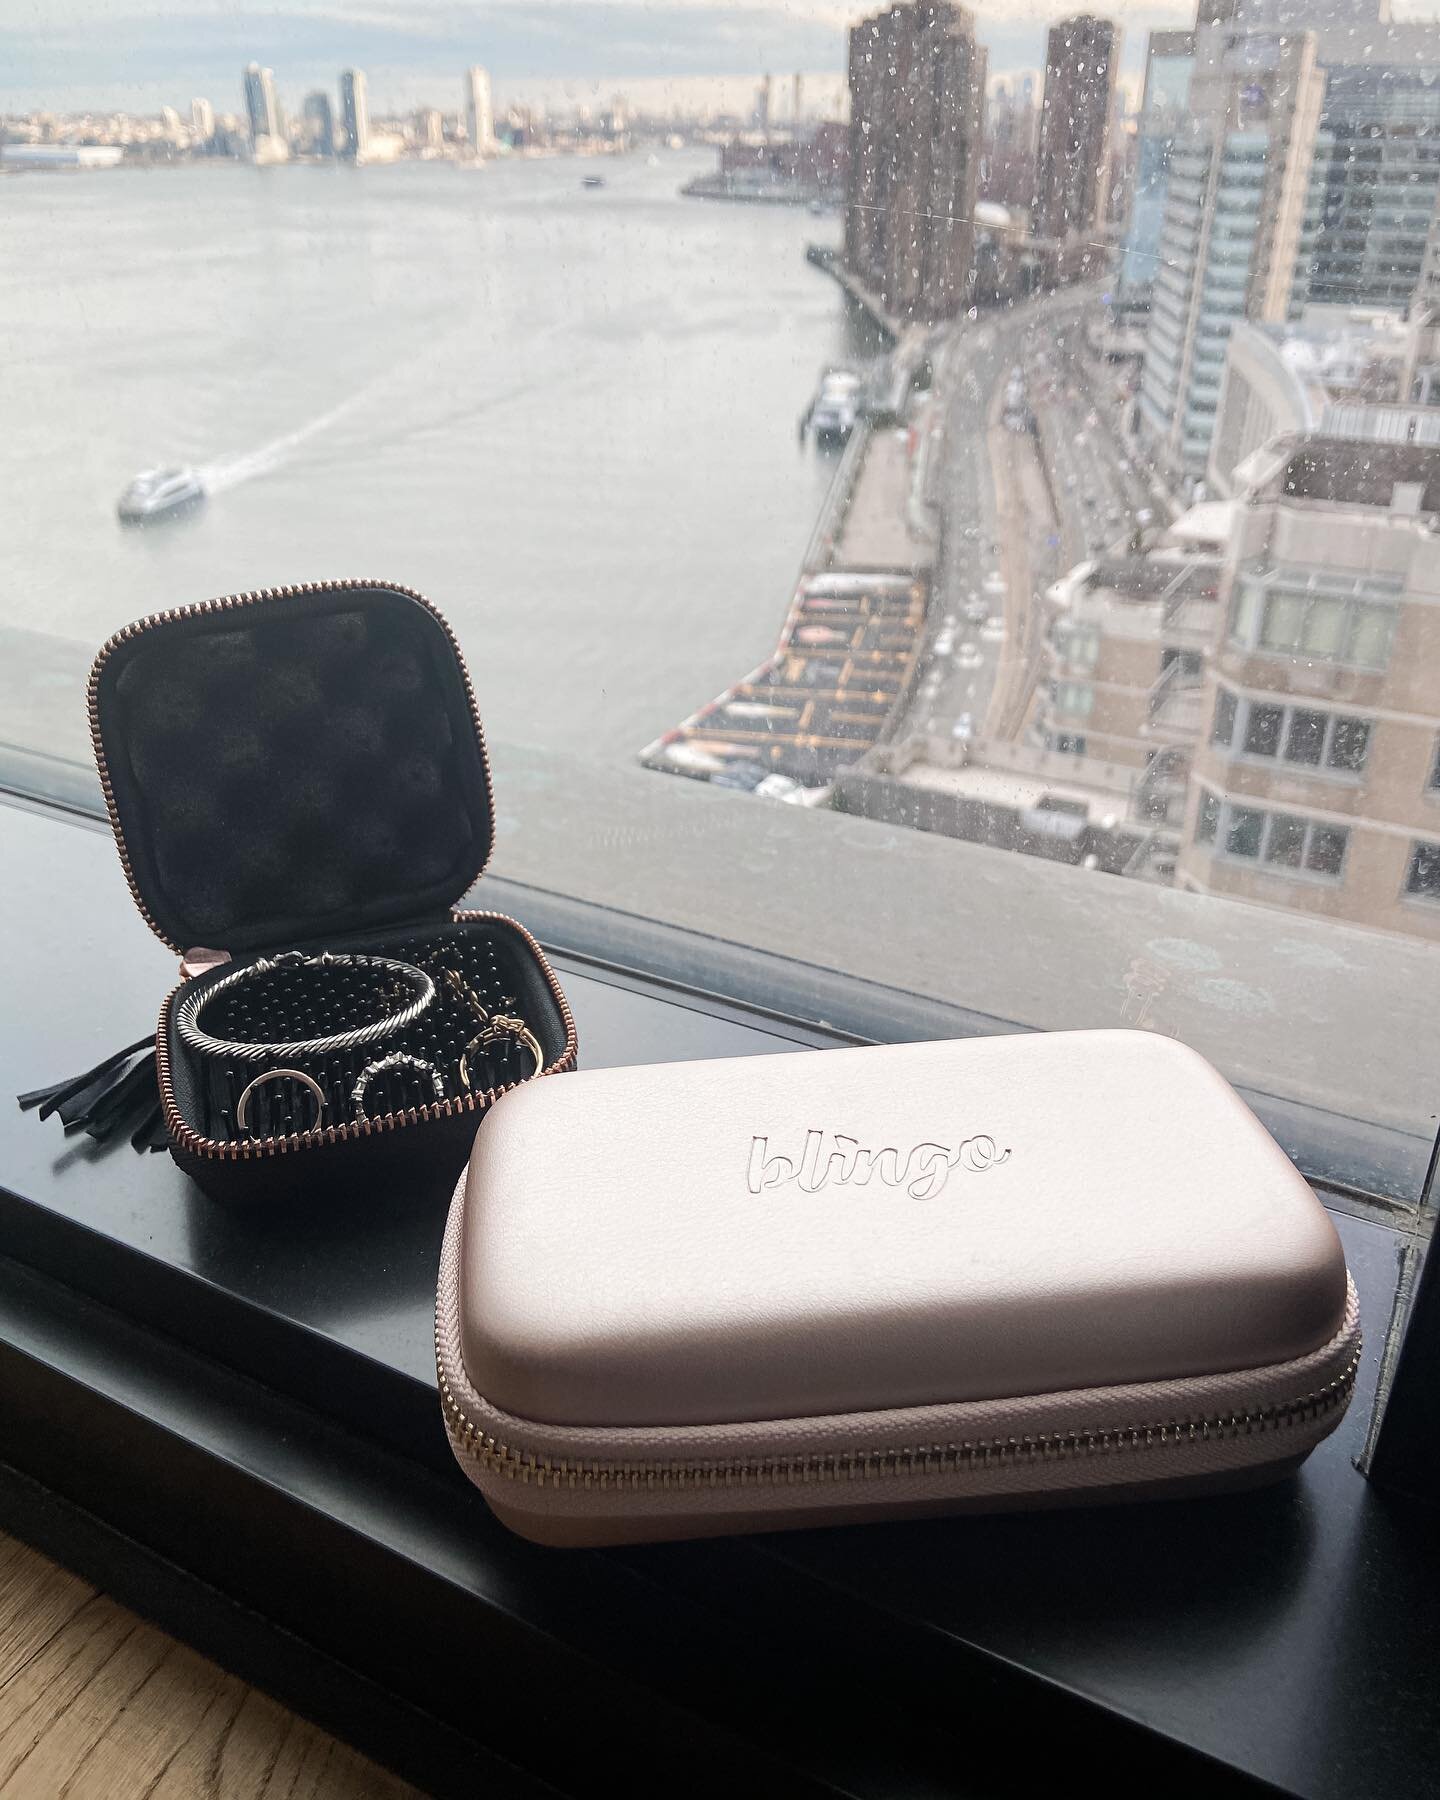 Attn: Jewelry people who like to switch it up on vacation. I have something for you, quite literally if you live in NYC. Enter to win this blush jewelry travel case that keeps your jewelry untangled when you&rsquo;re not wearing it. Just:

* Follow m